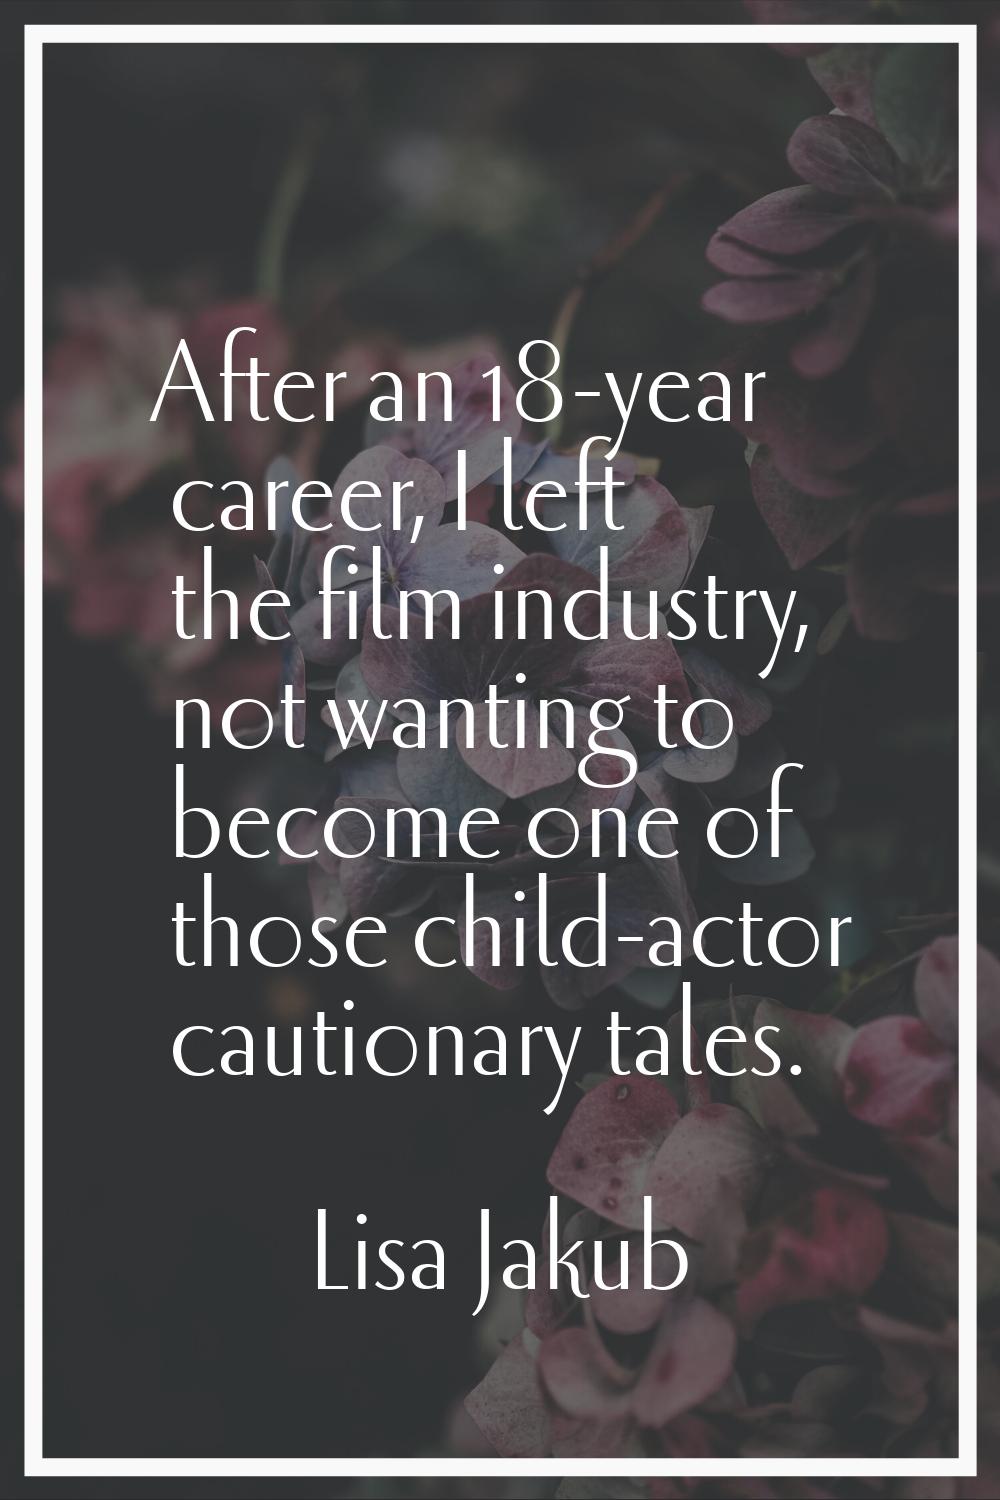 After an 18-year career, I left the film industry, not wanting to become one of those child-actor c